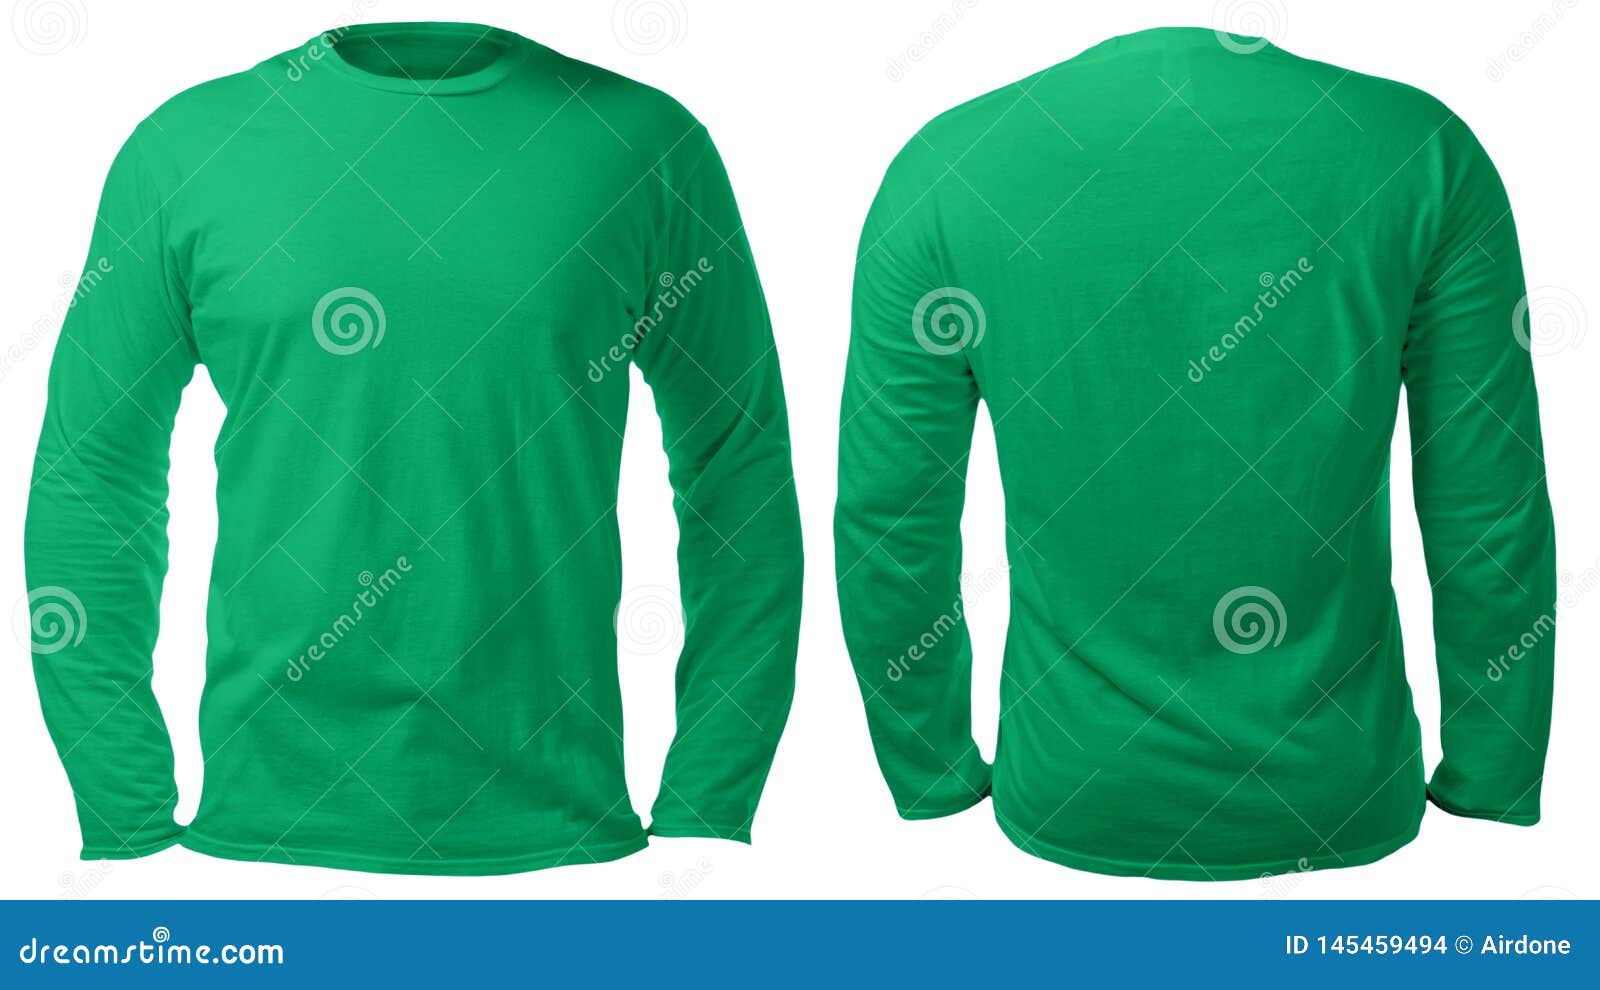 Download Green Long Sleeved Shirt Design Template Stock Photo Image Of Front Dress 145459494